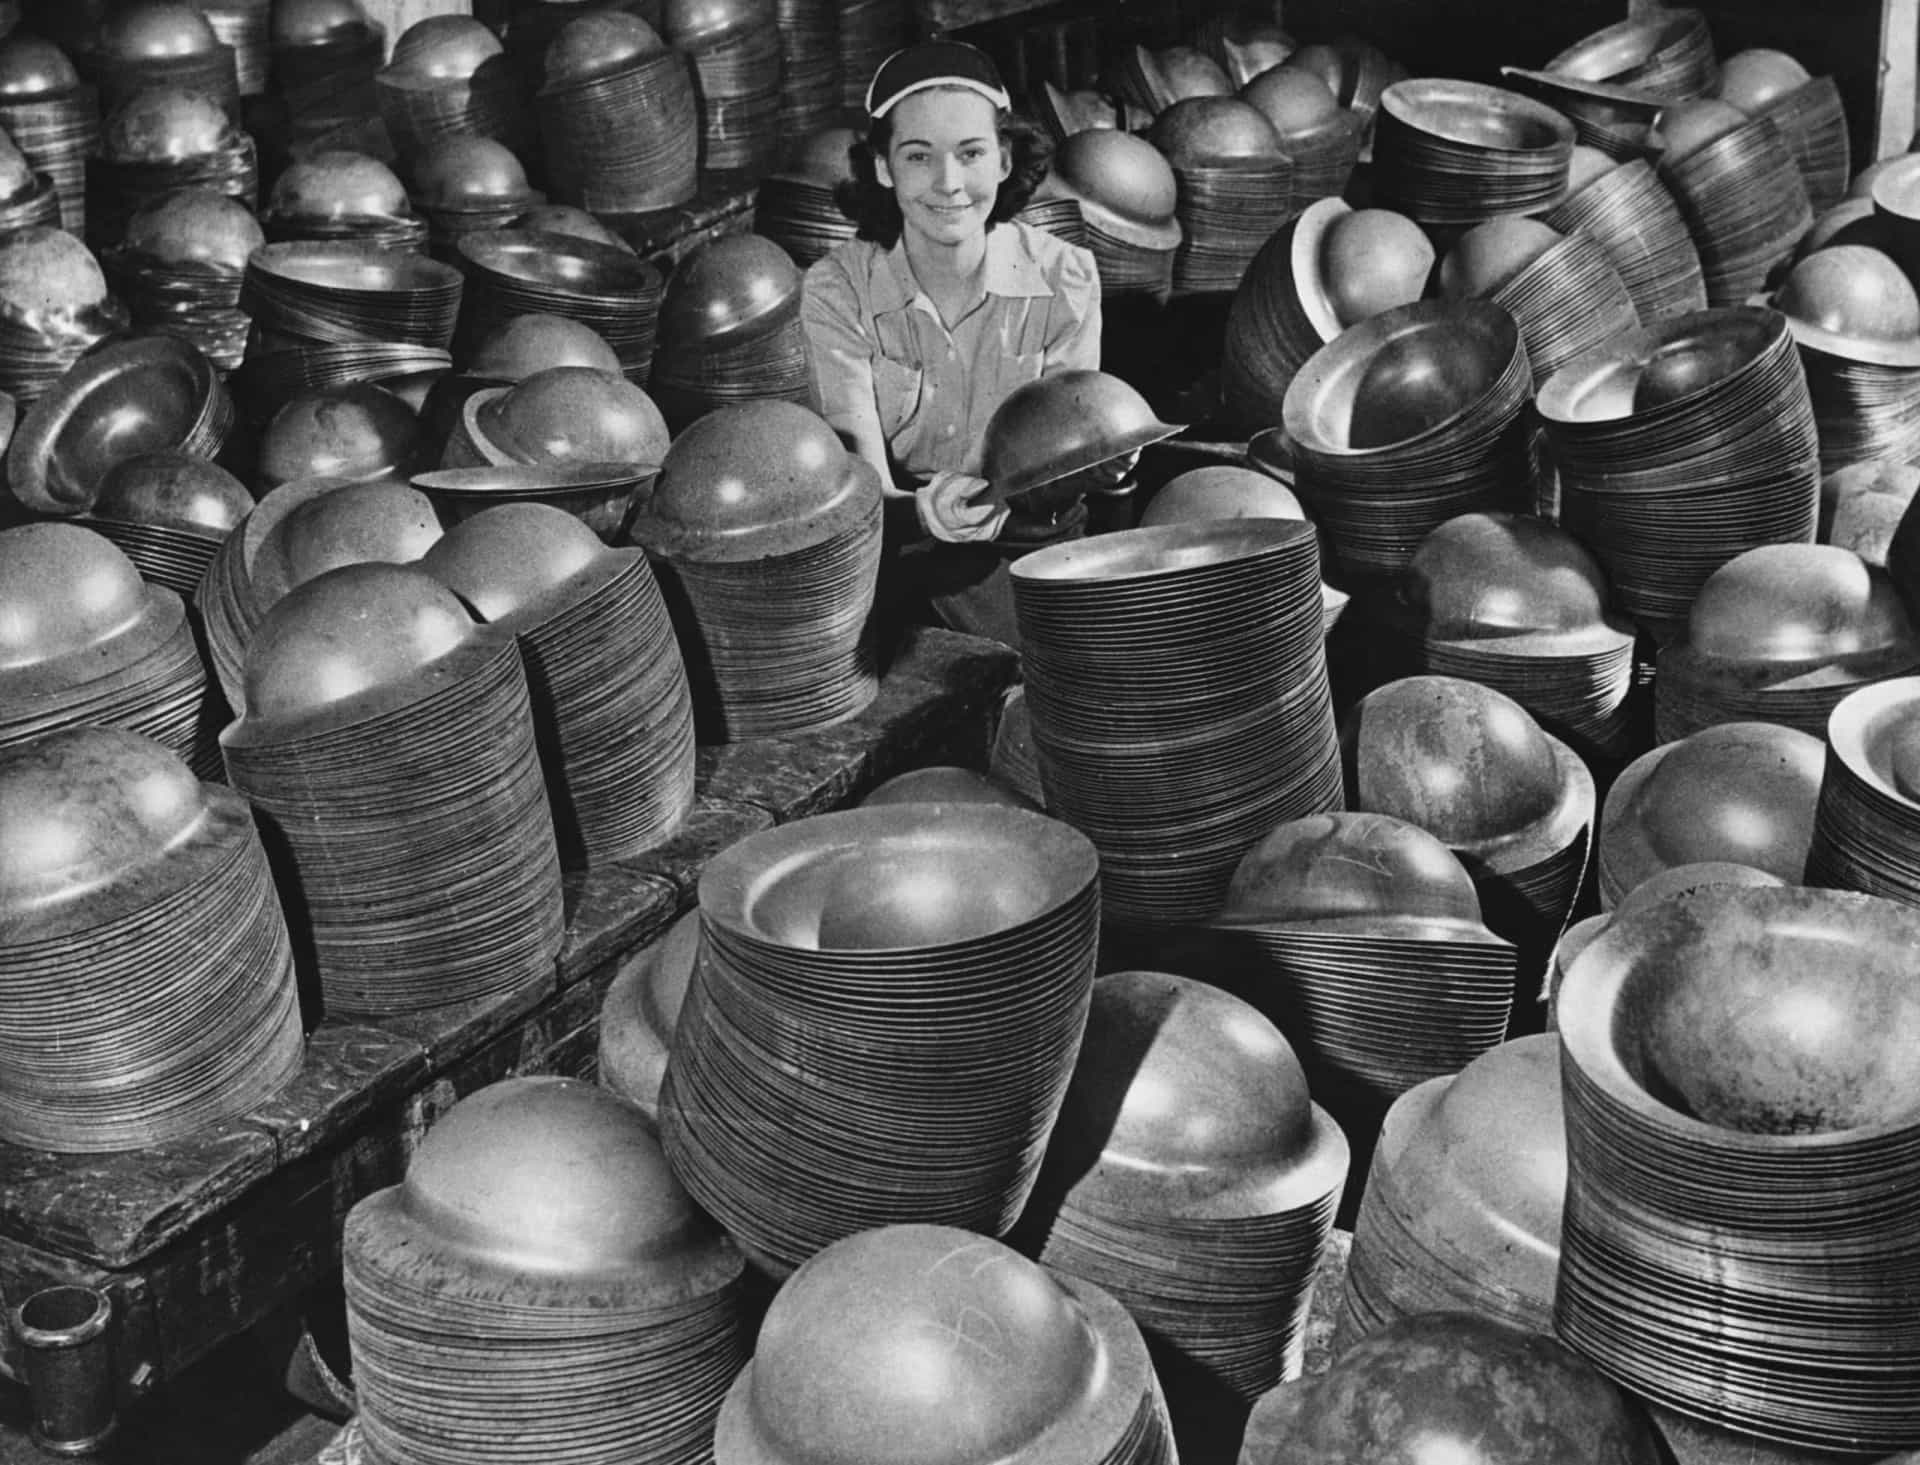 <p>A quality control inspector checks hundreds of Mk II Brodie helmets in a Canadian factory before the steel combat headgear is issued to combatants.</p><p>You may also like:<a href="https://www.starsinsider.com/n/367581?utm_source=msn.com&utm_medium=display&utm_campaign=referral_description&utm_content=517253en-us"> How to save money around the house during summer</a></p>